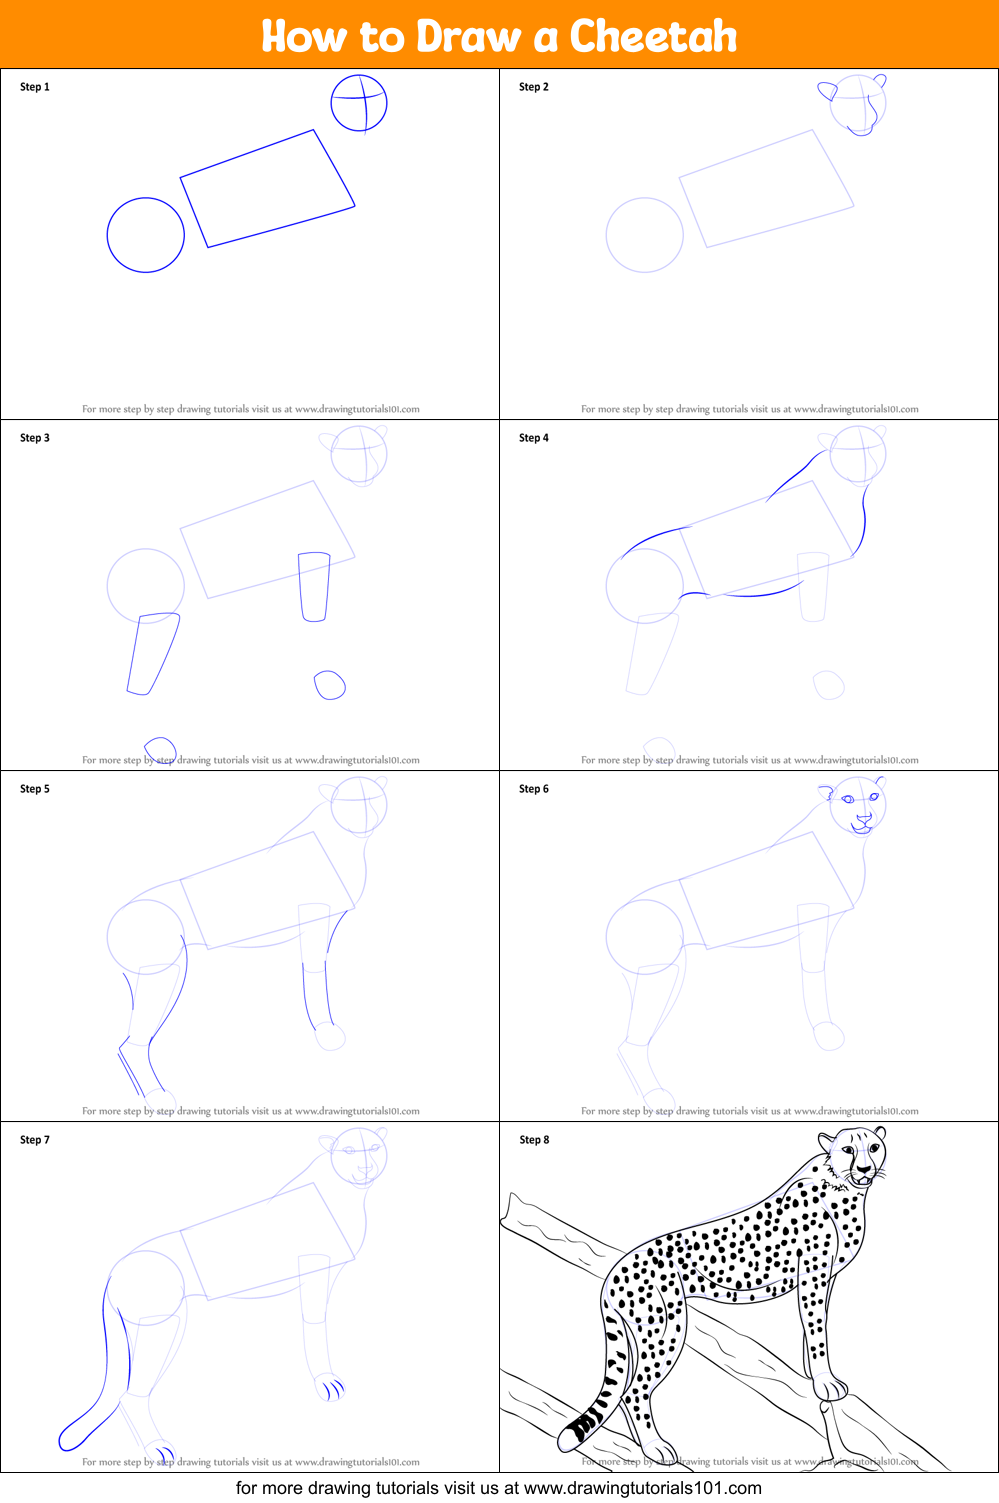 How to Draw a Cheetah printable step by step drawing sheet